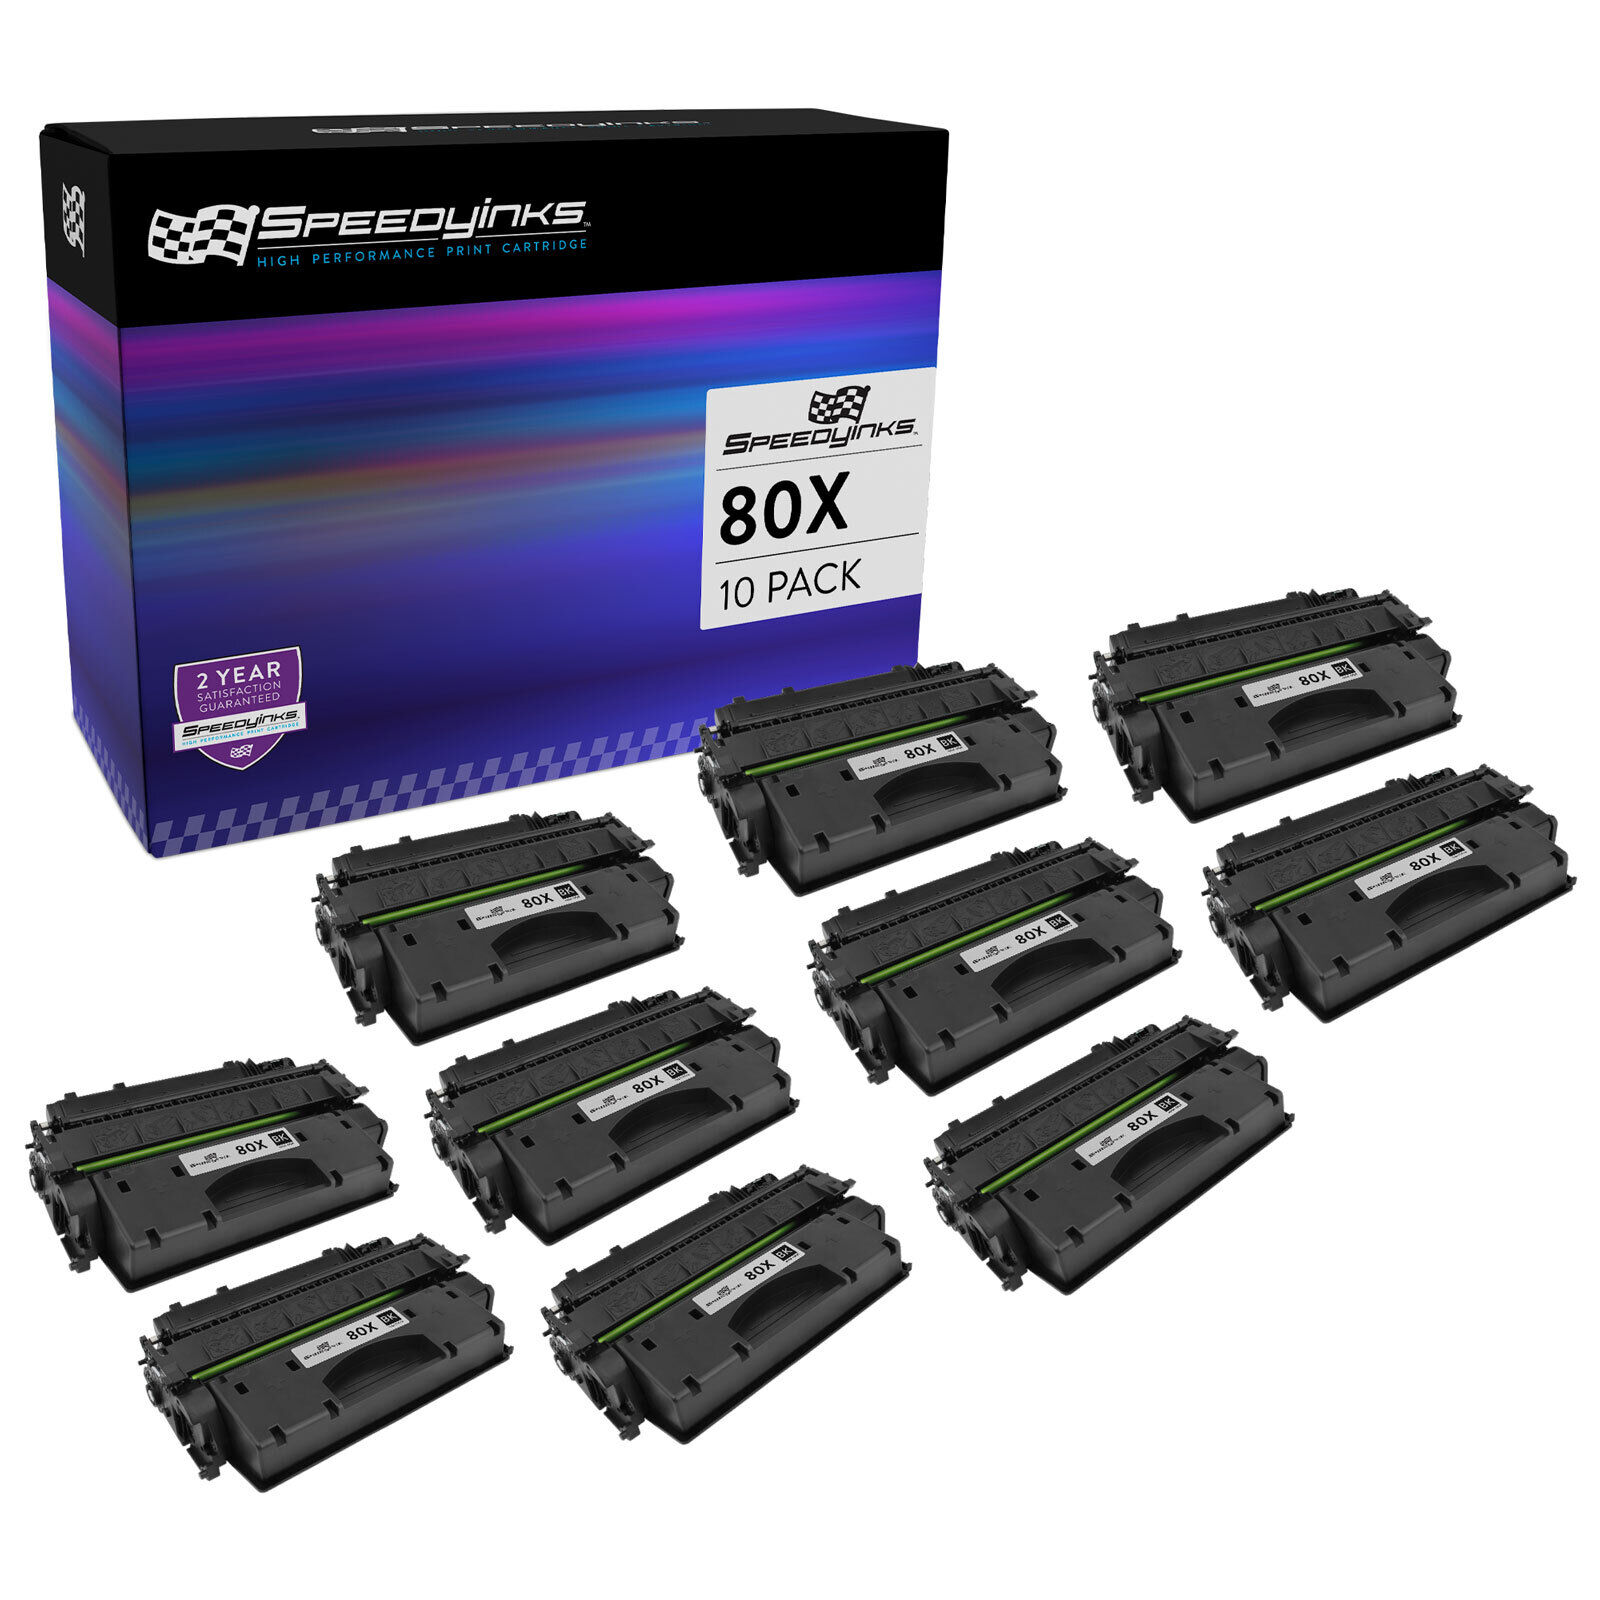 10 Pack Compatible Replacement CF280X 80X 80 Black Laser Toner Cartridge for HP